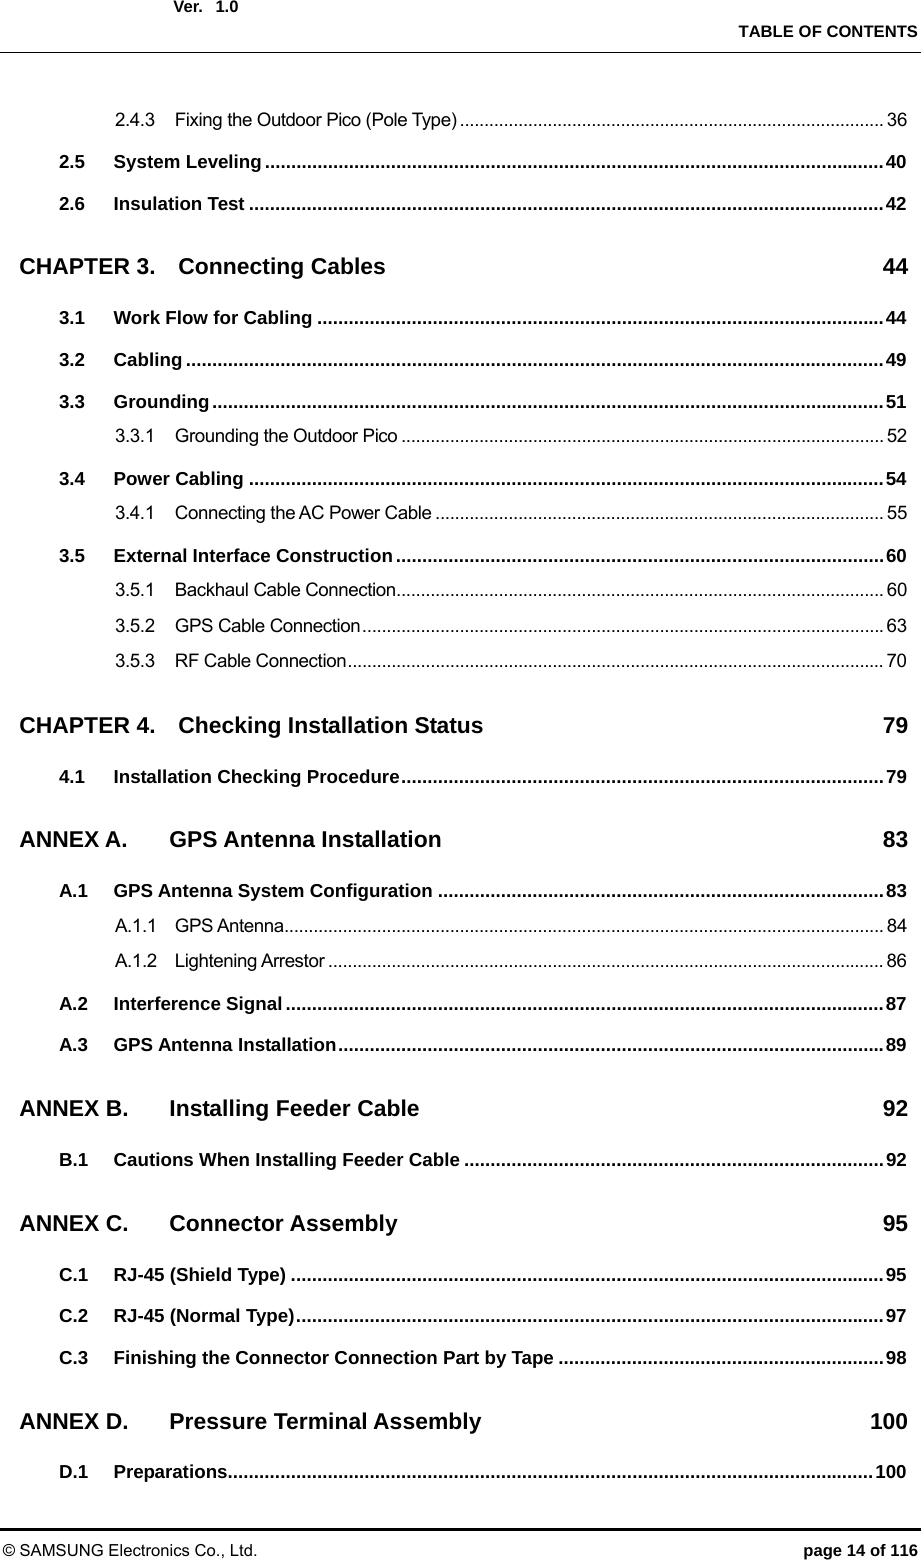  Ver.    TABLE OF CONTENTS © SAMSUNG Electronics Co., Ltd.  page 14 of 116 1.02.4.3 Fixing the Outdoor Pico (Pole Type) ....................................................................................... 36 2.5 System Leveling ...................................................................................................................... 40 2.6 Insulation Test ......................................................................................................................... 42 CHAPTER 3. Connecting Cables  44 3.1 Work Flow for Cabling ............................................................................................................ 44 3.2 Cabling ..................................................................................................................................... 49 3.3 Grounding ................................................................................................................................ 51 3.3.1 Grounding the Outdoor Pico ................................................................................................... 52 3.4 Power Cabling ......................................................................................................................... 54 3.4.1 Connecting the AC Power Cable ............................................................................................ 55 3.5 External Interface Construction ............................................................................................. 60 3.5.1 Backhaul Cable Connection .................................................................................................... 60 3.5.2 GPS Cable Connection ........................................................................................................... 63 3.5.3 RF Cable Connection .............................................................................................................. 70 CHAPTER 4. Checking Installation Status  79 4.1 Installation Checking Procedure ............................................................................................ 79 ANNEX A. GPS Antenna Installation  83 A.1 GPS Antenna System Configuration ..................................................................................... 83 A.1.1 GPS Antenna ........................................................................................................................... 84 A.1.2 Lightening Arrestor .................................................................................................................. 86 A.2 Interference Signal .................................................................................................................. 87 A.3 GPS Antenna Installation ........................................................................................................ 89 ANNEX B. Installing Feeder Cable  92 B.1 Cautions When Installing Feeder Cable ................................................................................ 92 ANNEX C. Connector Assembly  95 C.1 RJ-45 (Shield Type) ................................................................................................................. 95 C.2 RJ-45 (Normal Type) ................................................................................................................ 97 C.3 Finishing the Connector Connection Part by Tape .............................................................. 98 ANNEX D. Pressure Terminal Assembly  100 D.1 Preparations........................................................................................................................... 100 